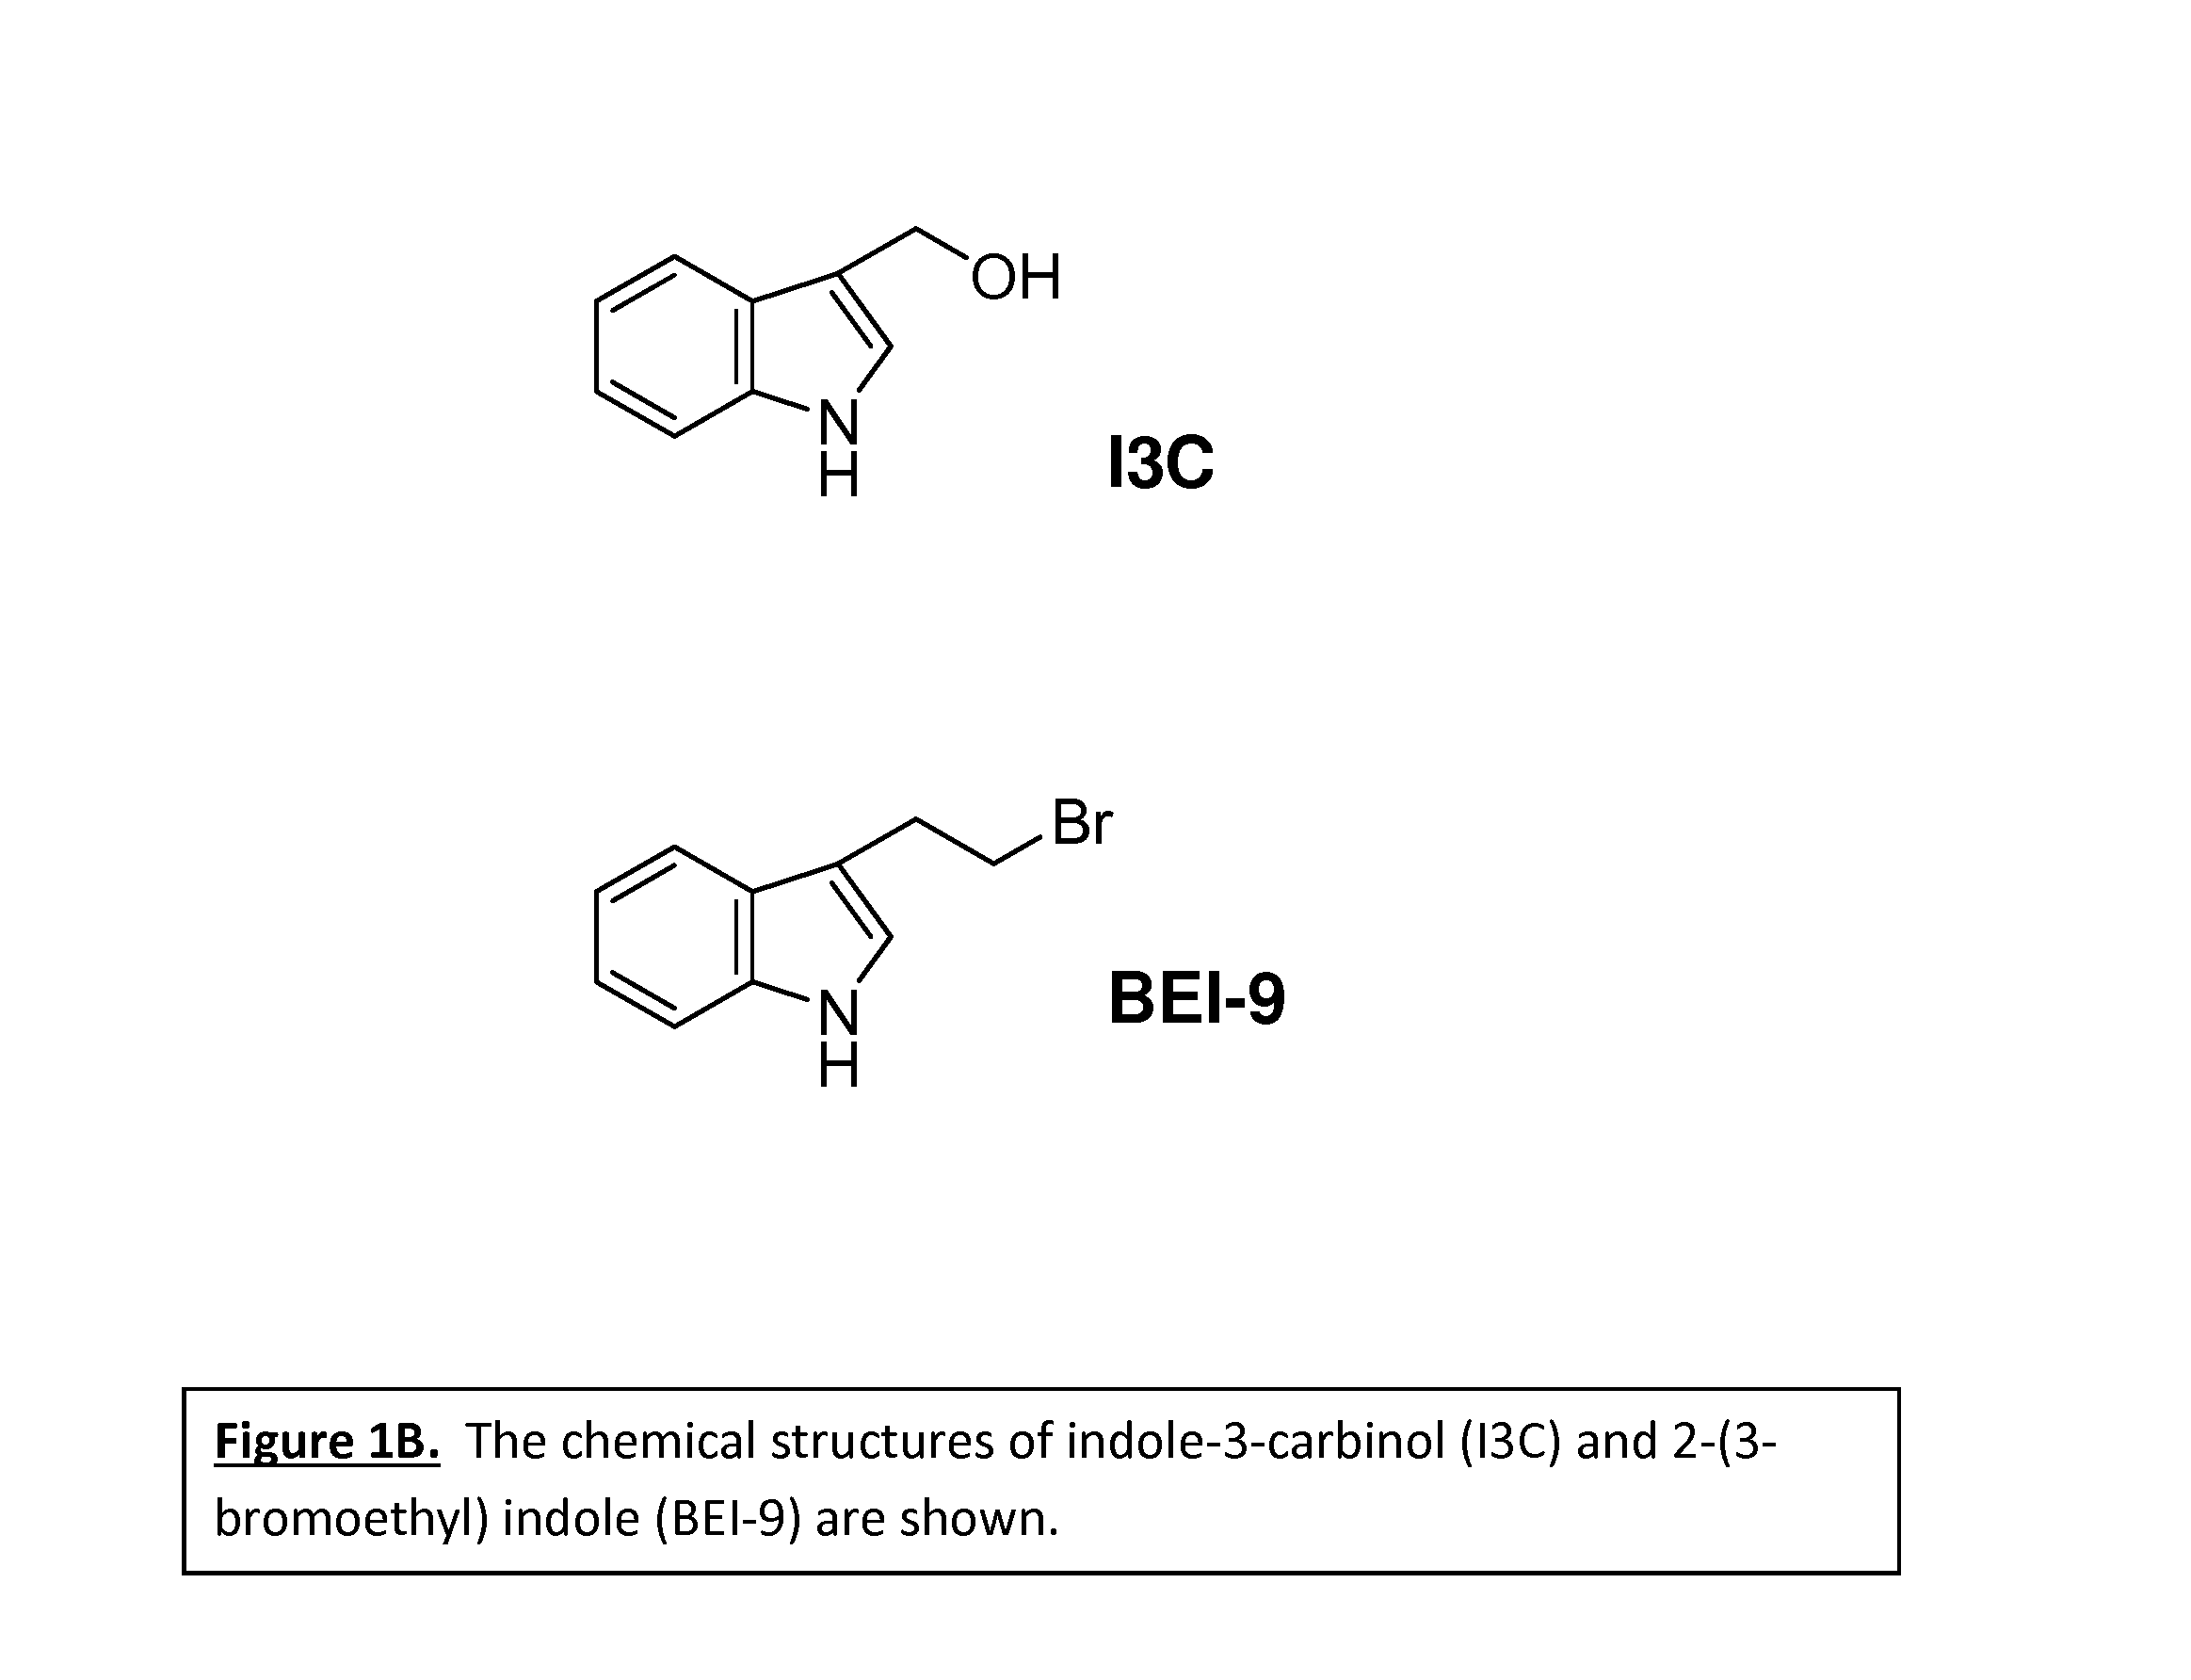 Anticancer treatment methods involving analogs and derivatives of 3-(2-substituted-ethyl) indole compounds